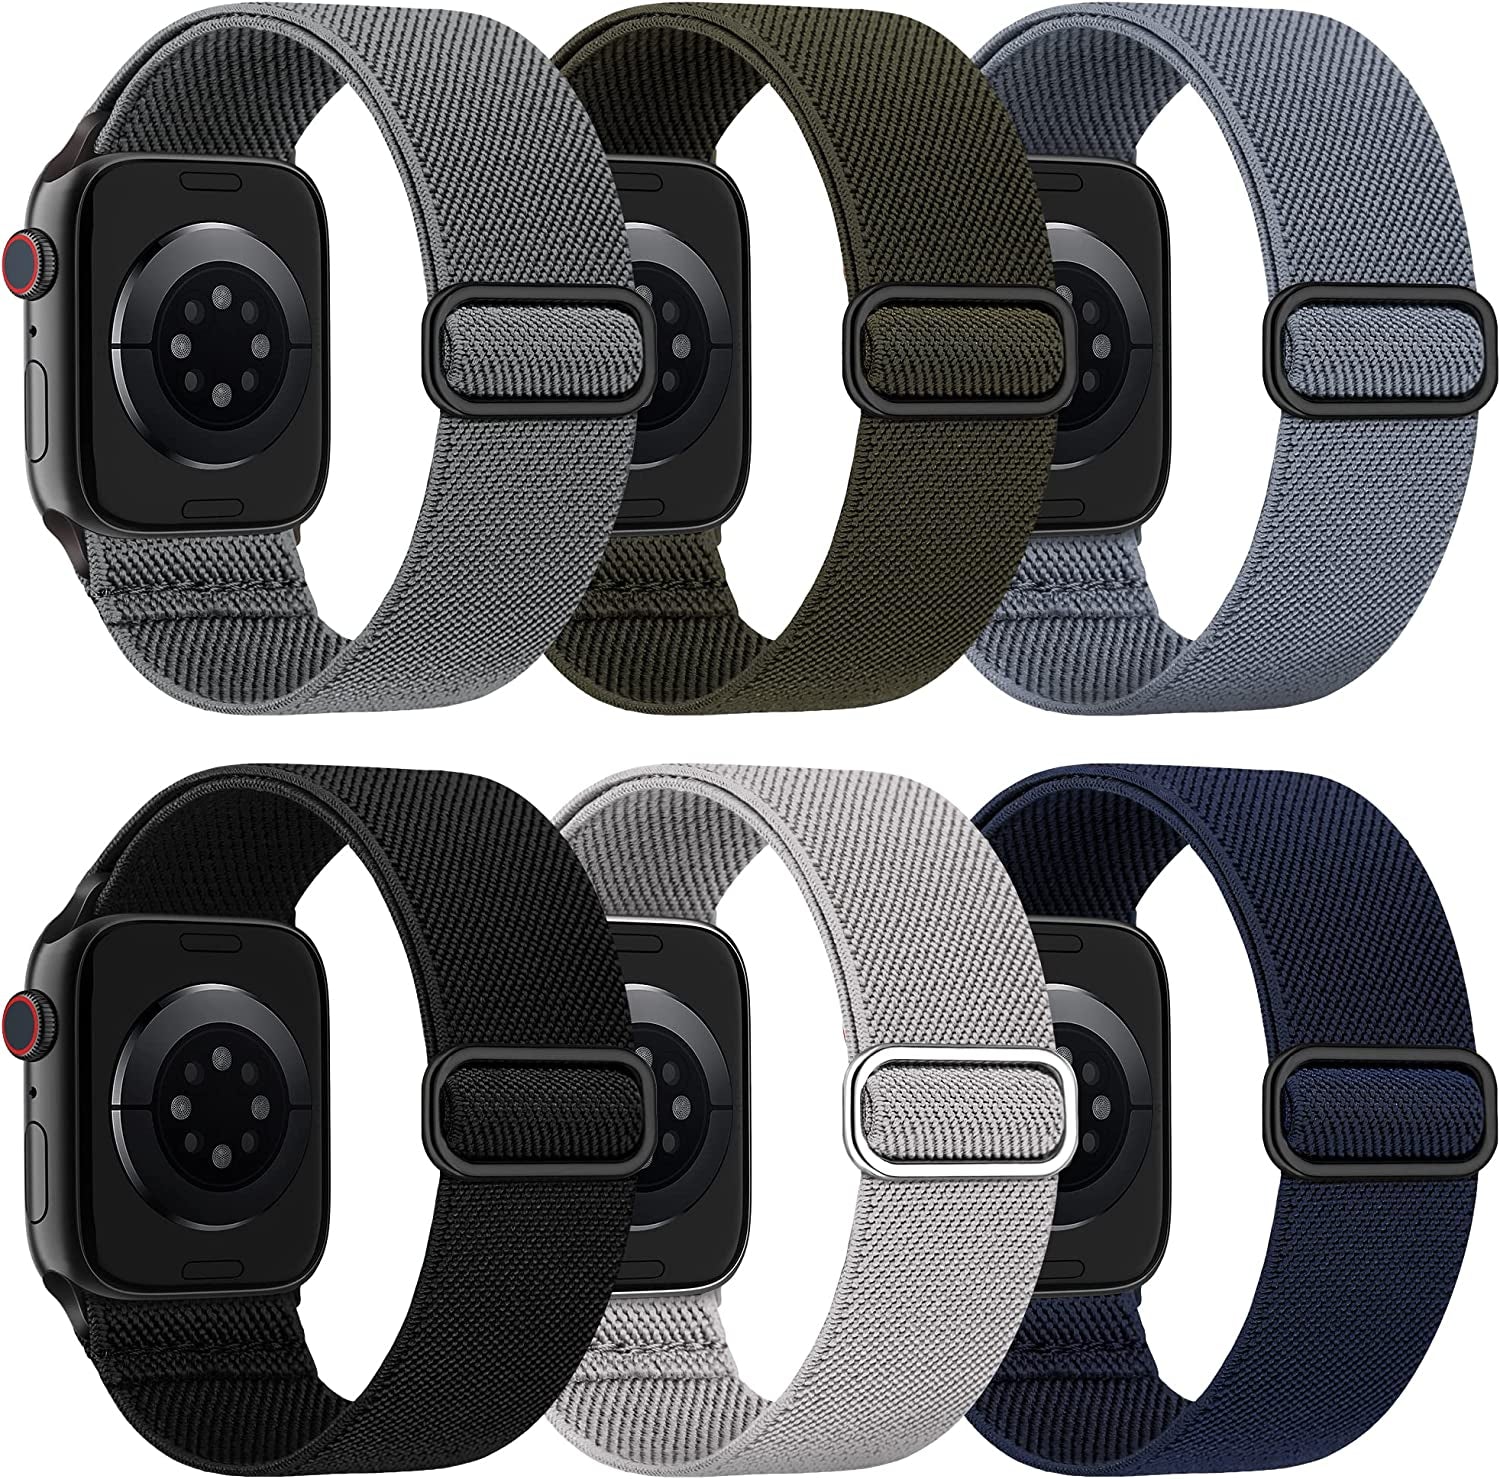 6 Pack Nylon Stretchy Compatible for Apple Watch Band